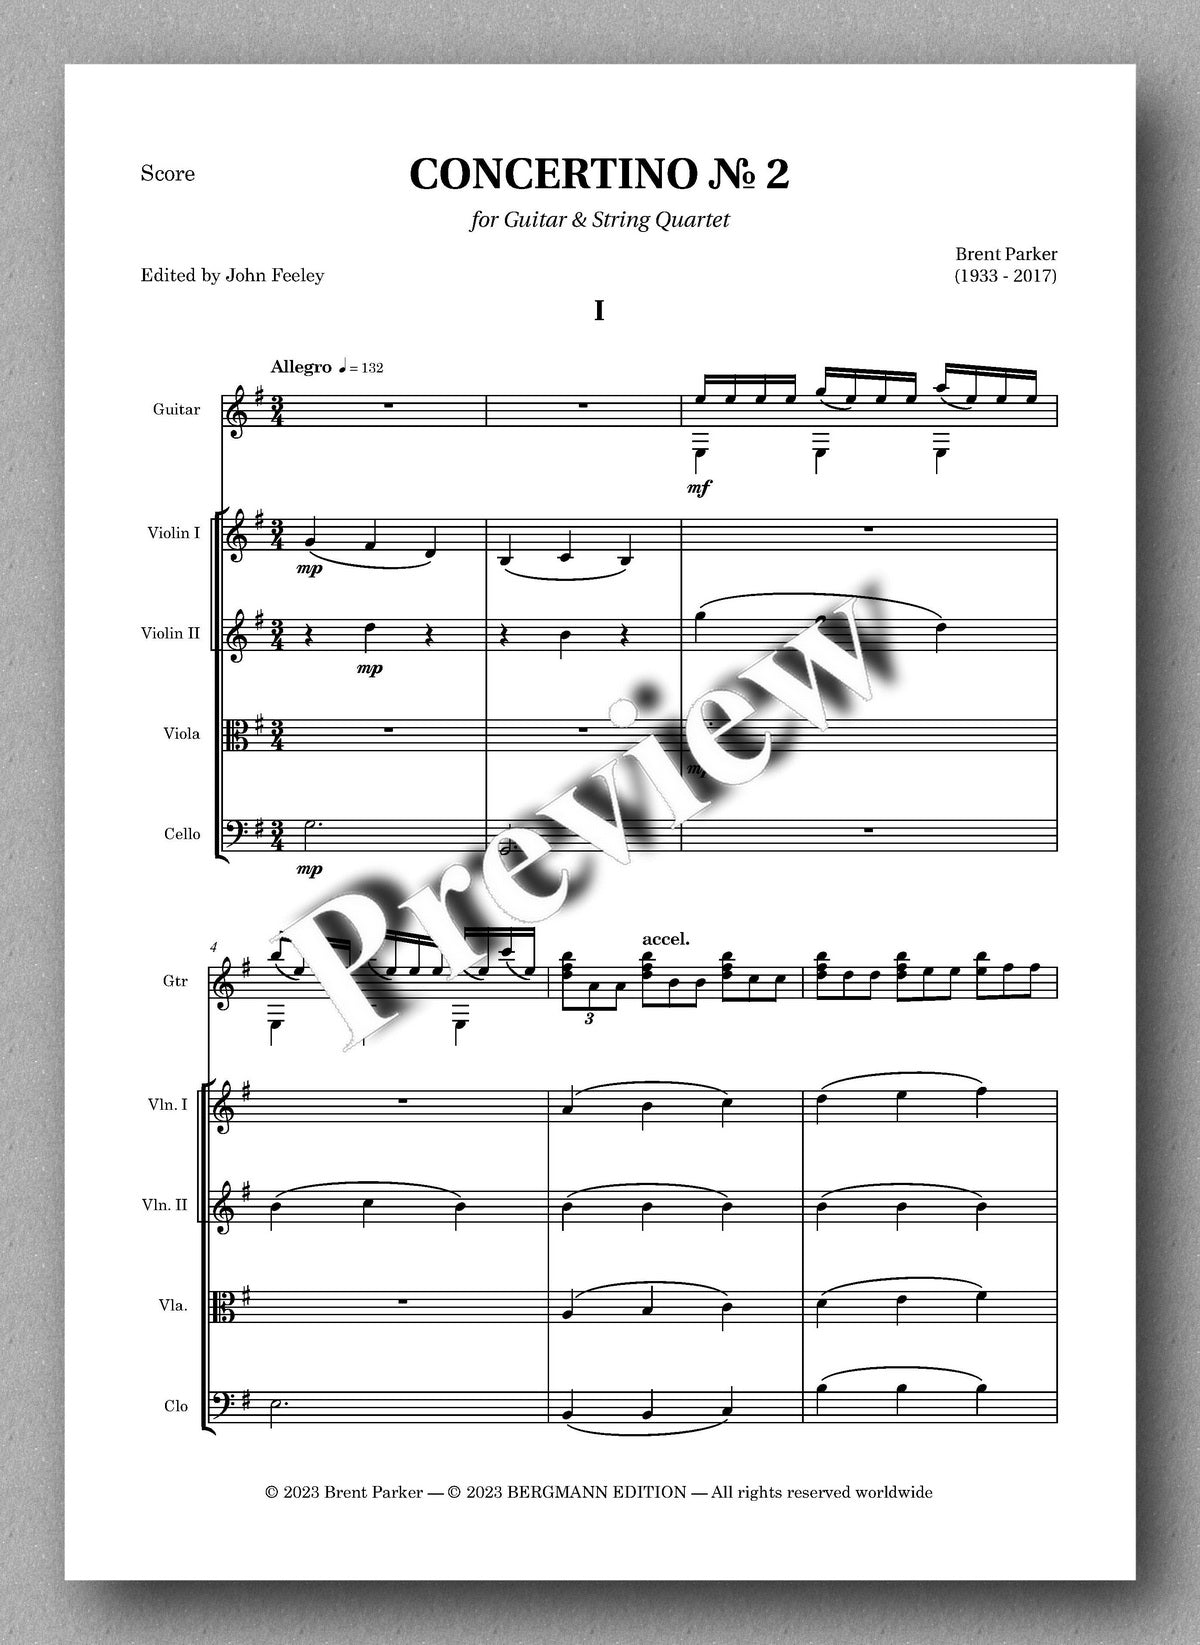 Concertino № 2 by Brent Parker - preview of the music score 1